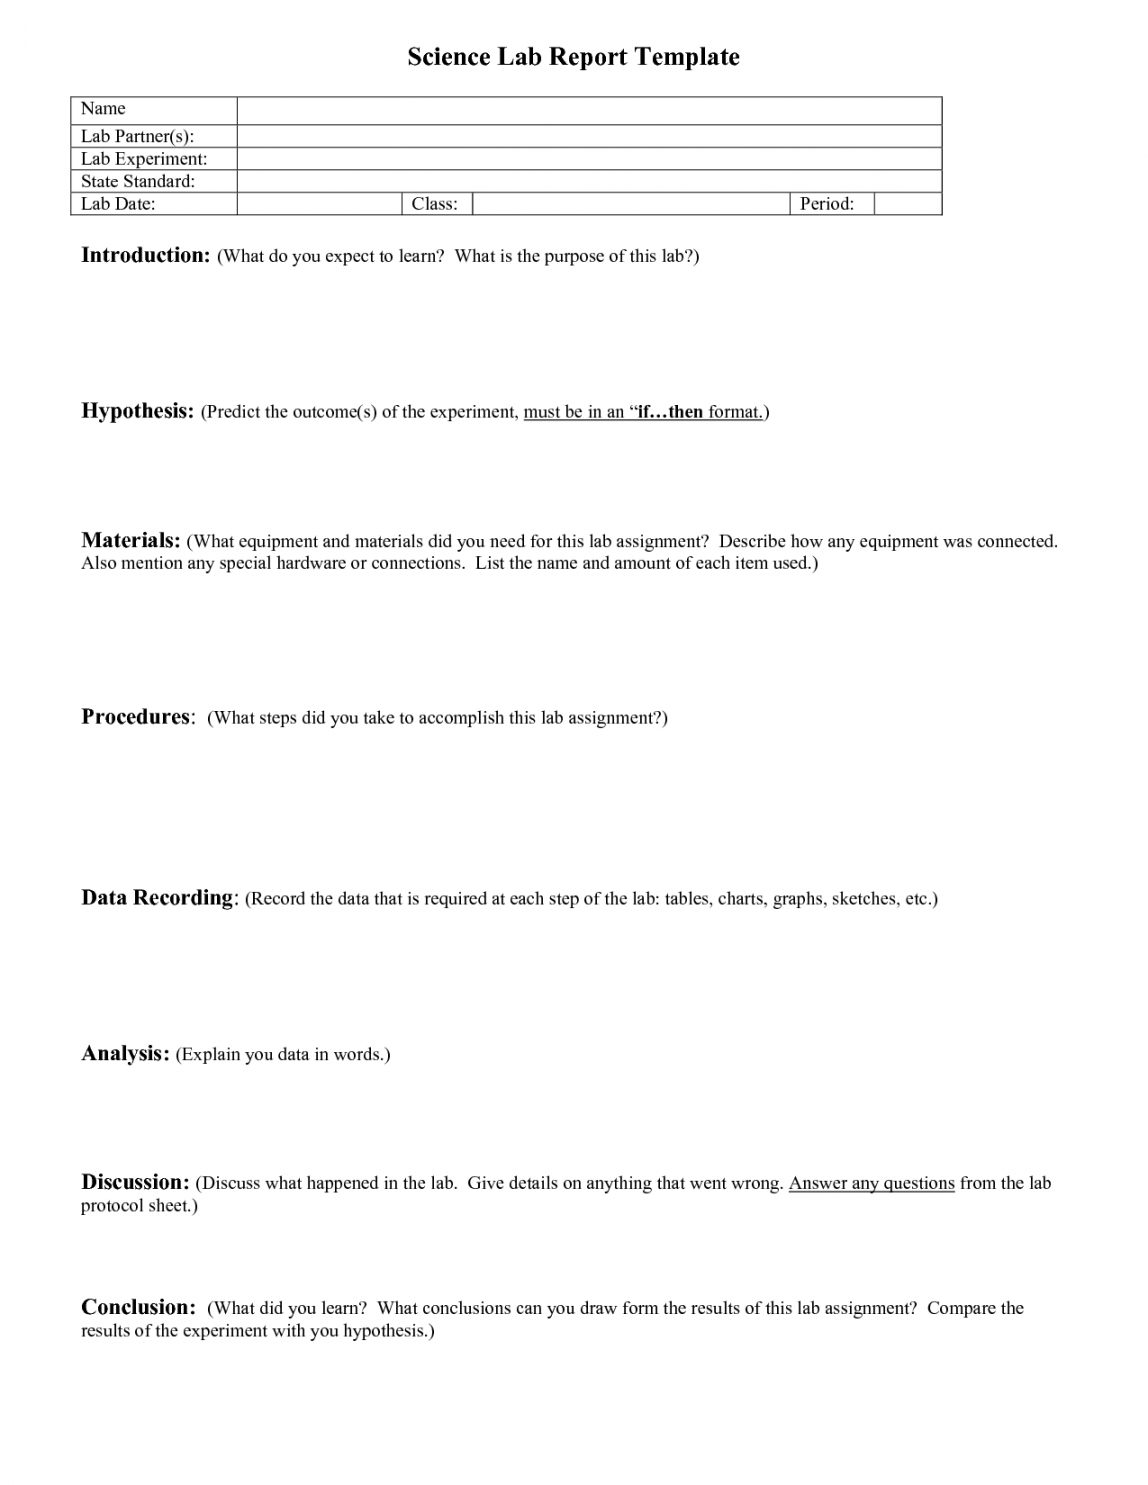 Free Lab Report Outline Science Lab Report Template School Regarding Science Lab Report Template